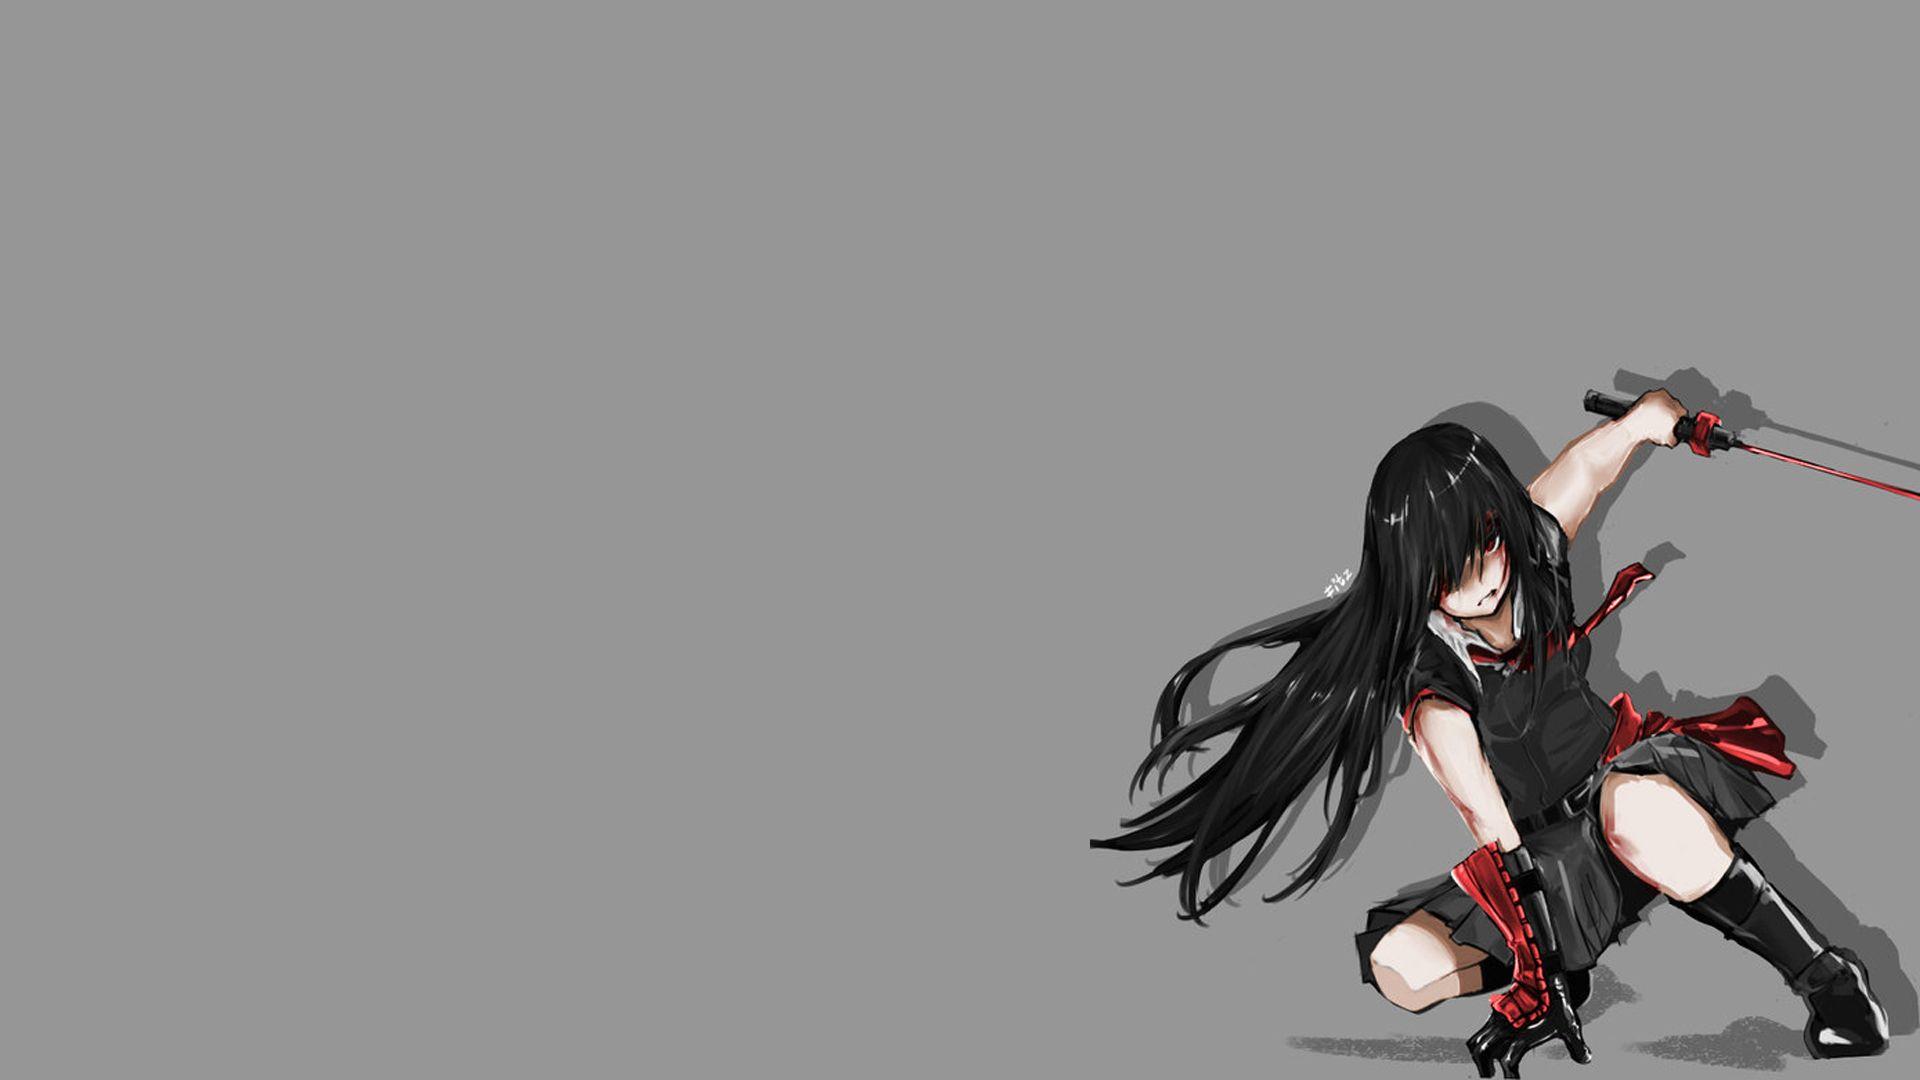 Akame Ga Kill Wallpaper, Akame Ga Kill Wallpaper For Free Download